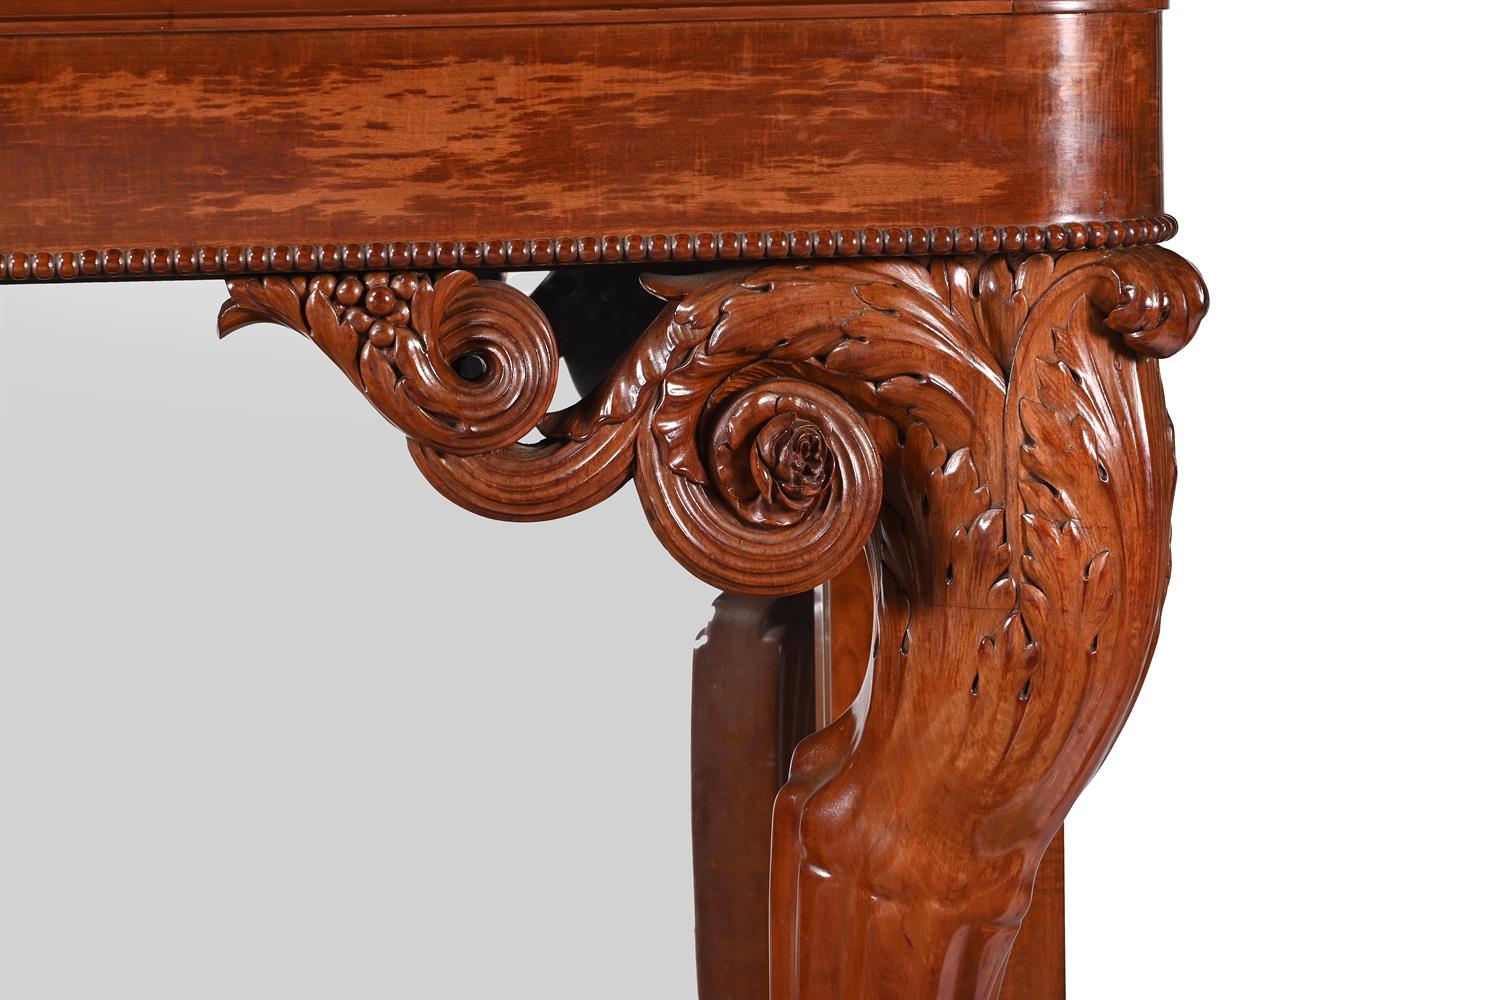 A FRENCH CARVED MAHOGANY AND ROSSO LEVANTO MARBLE TOP CONSOLE TABLE, EARLY 19TH CENTURY - Image 3 of 3